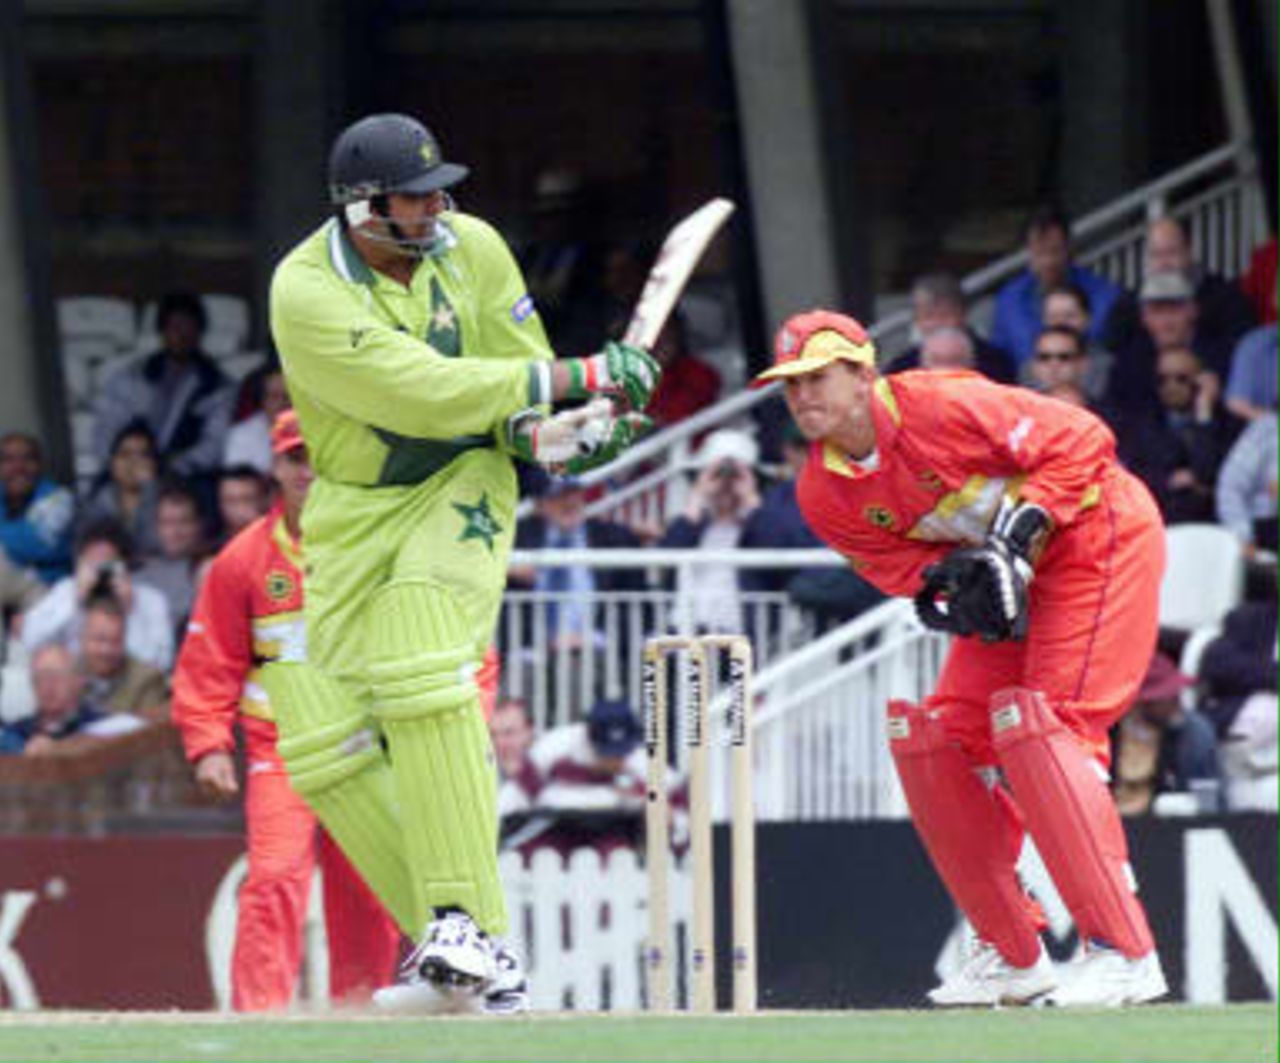 Inzamam-ul-Haq of Pakistan batting during the Cricket World Cup match at the Ova l in London,  11 June 1999.